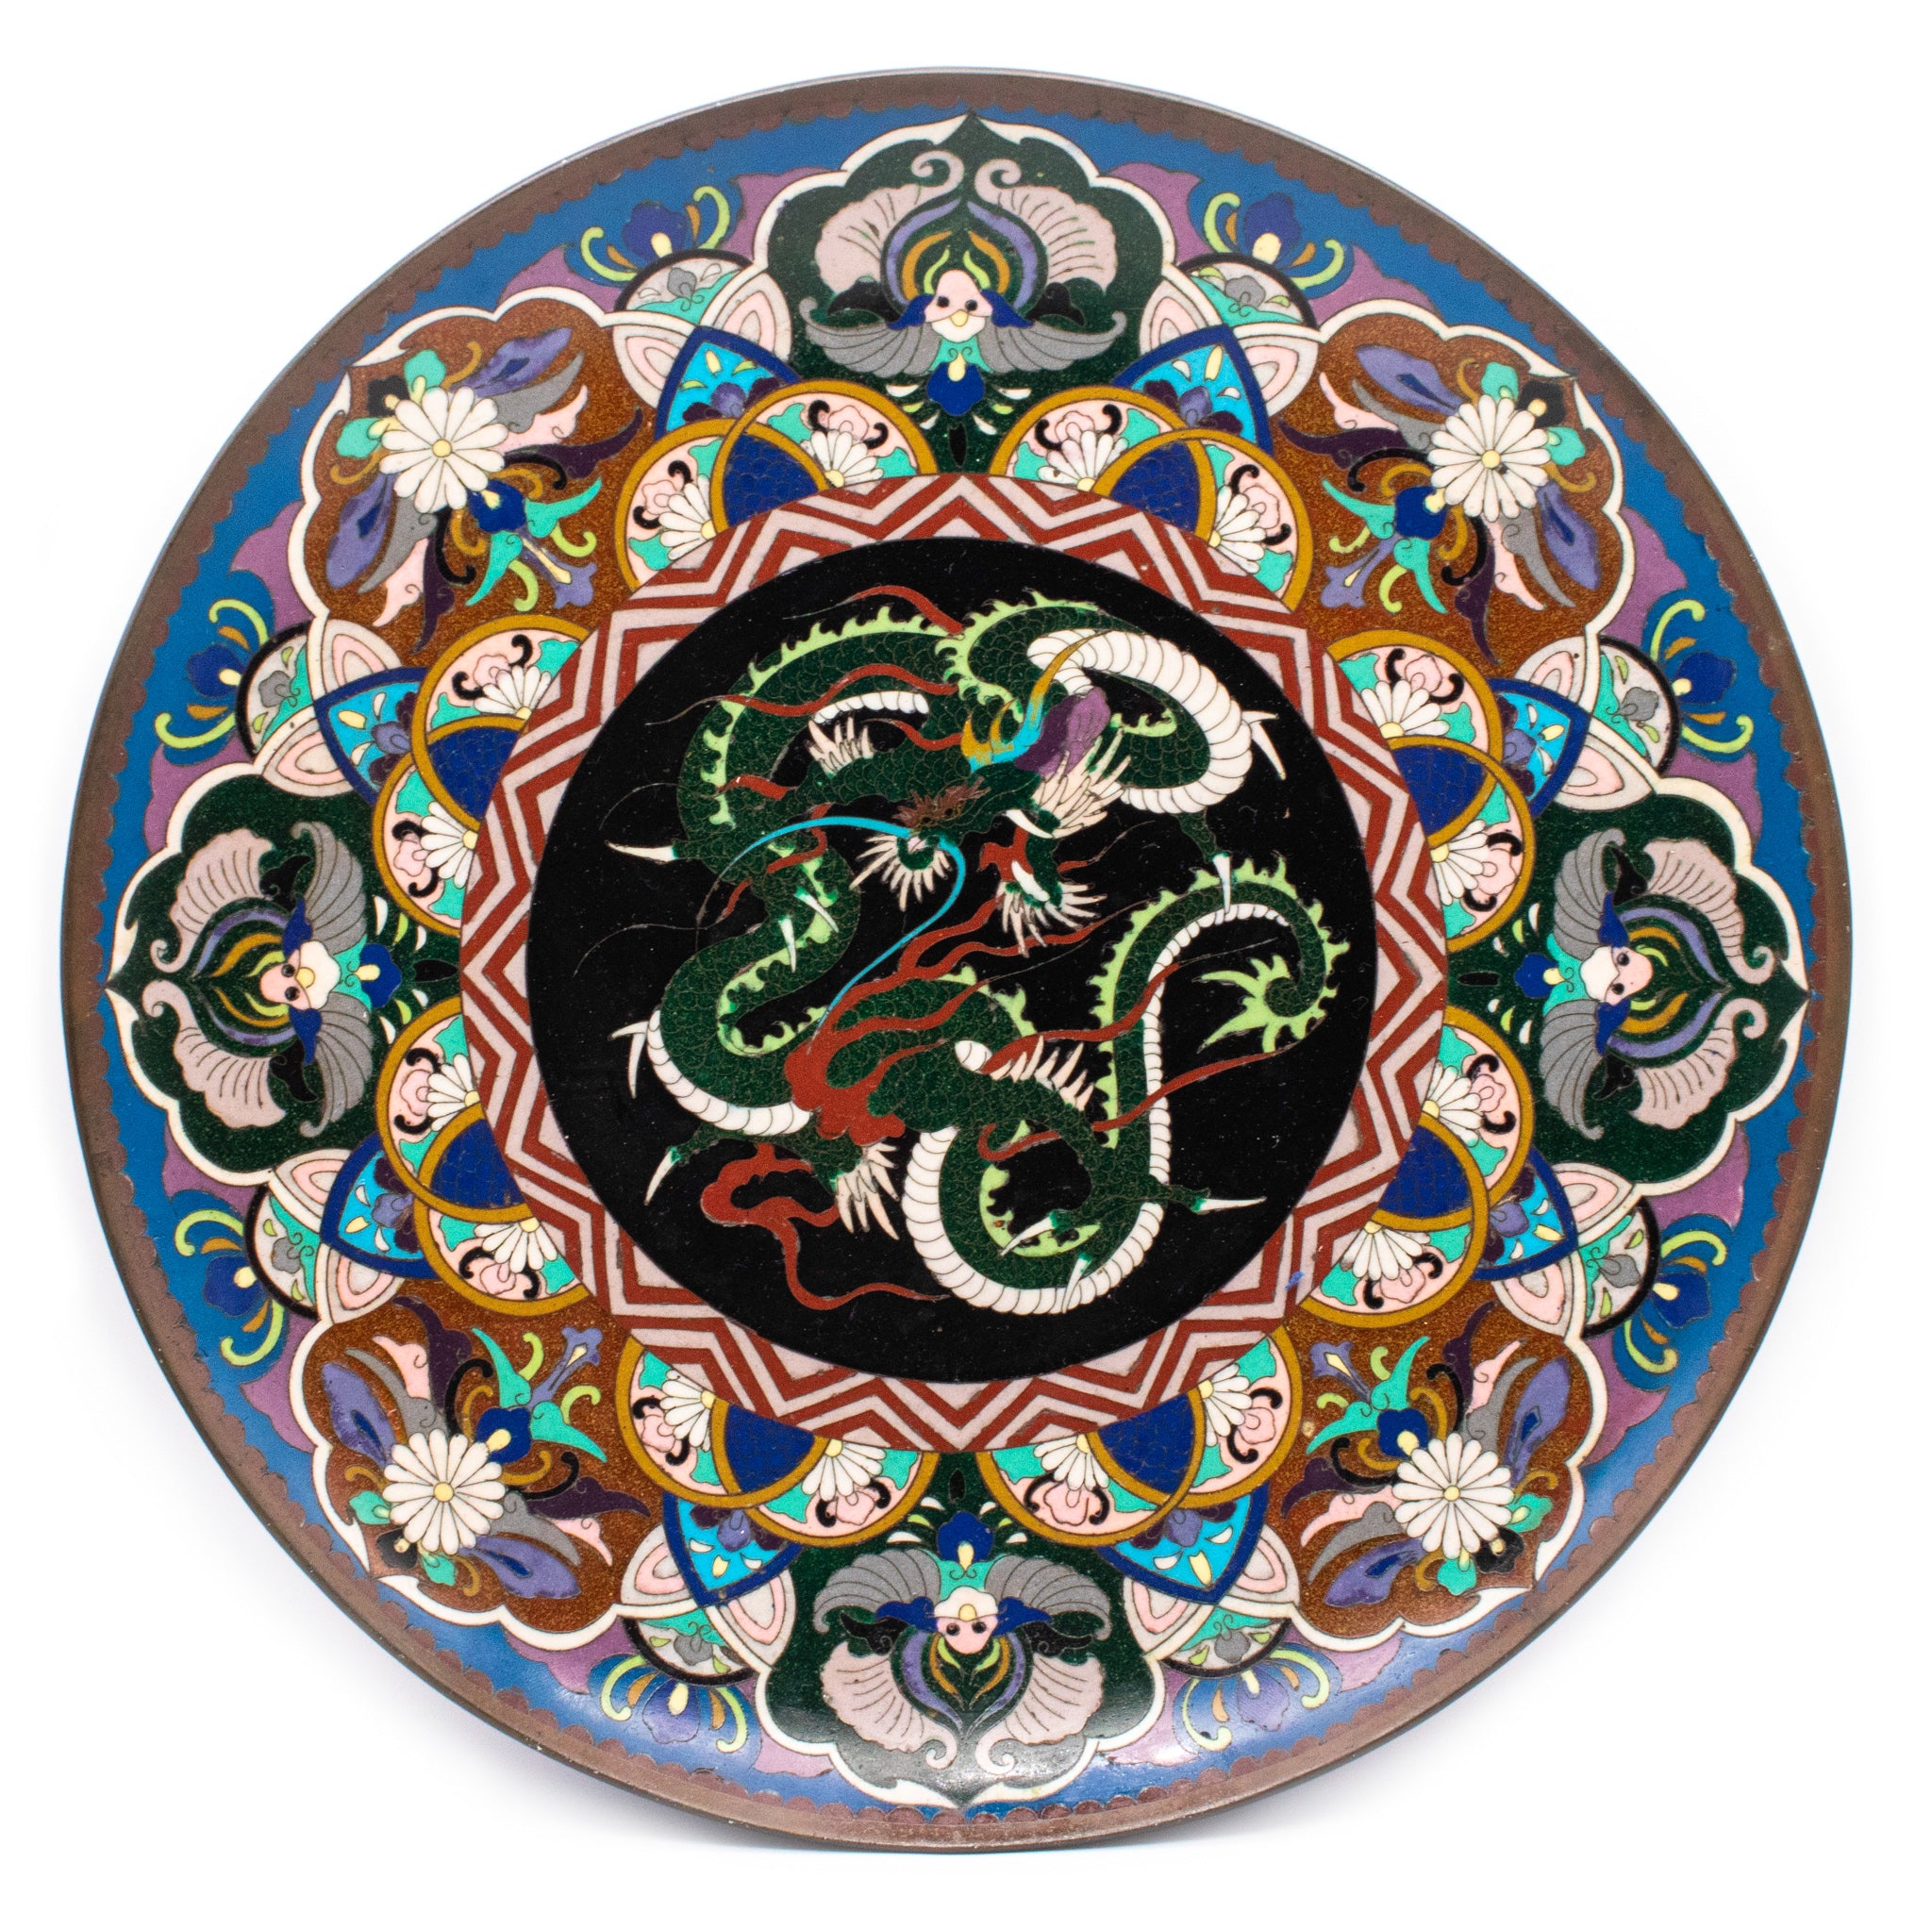 +Japan 1900 Meiji Period Charger With A Dragon In Cloisonné Multicolor Enamel